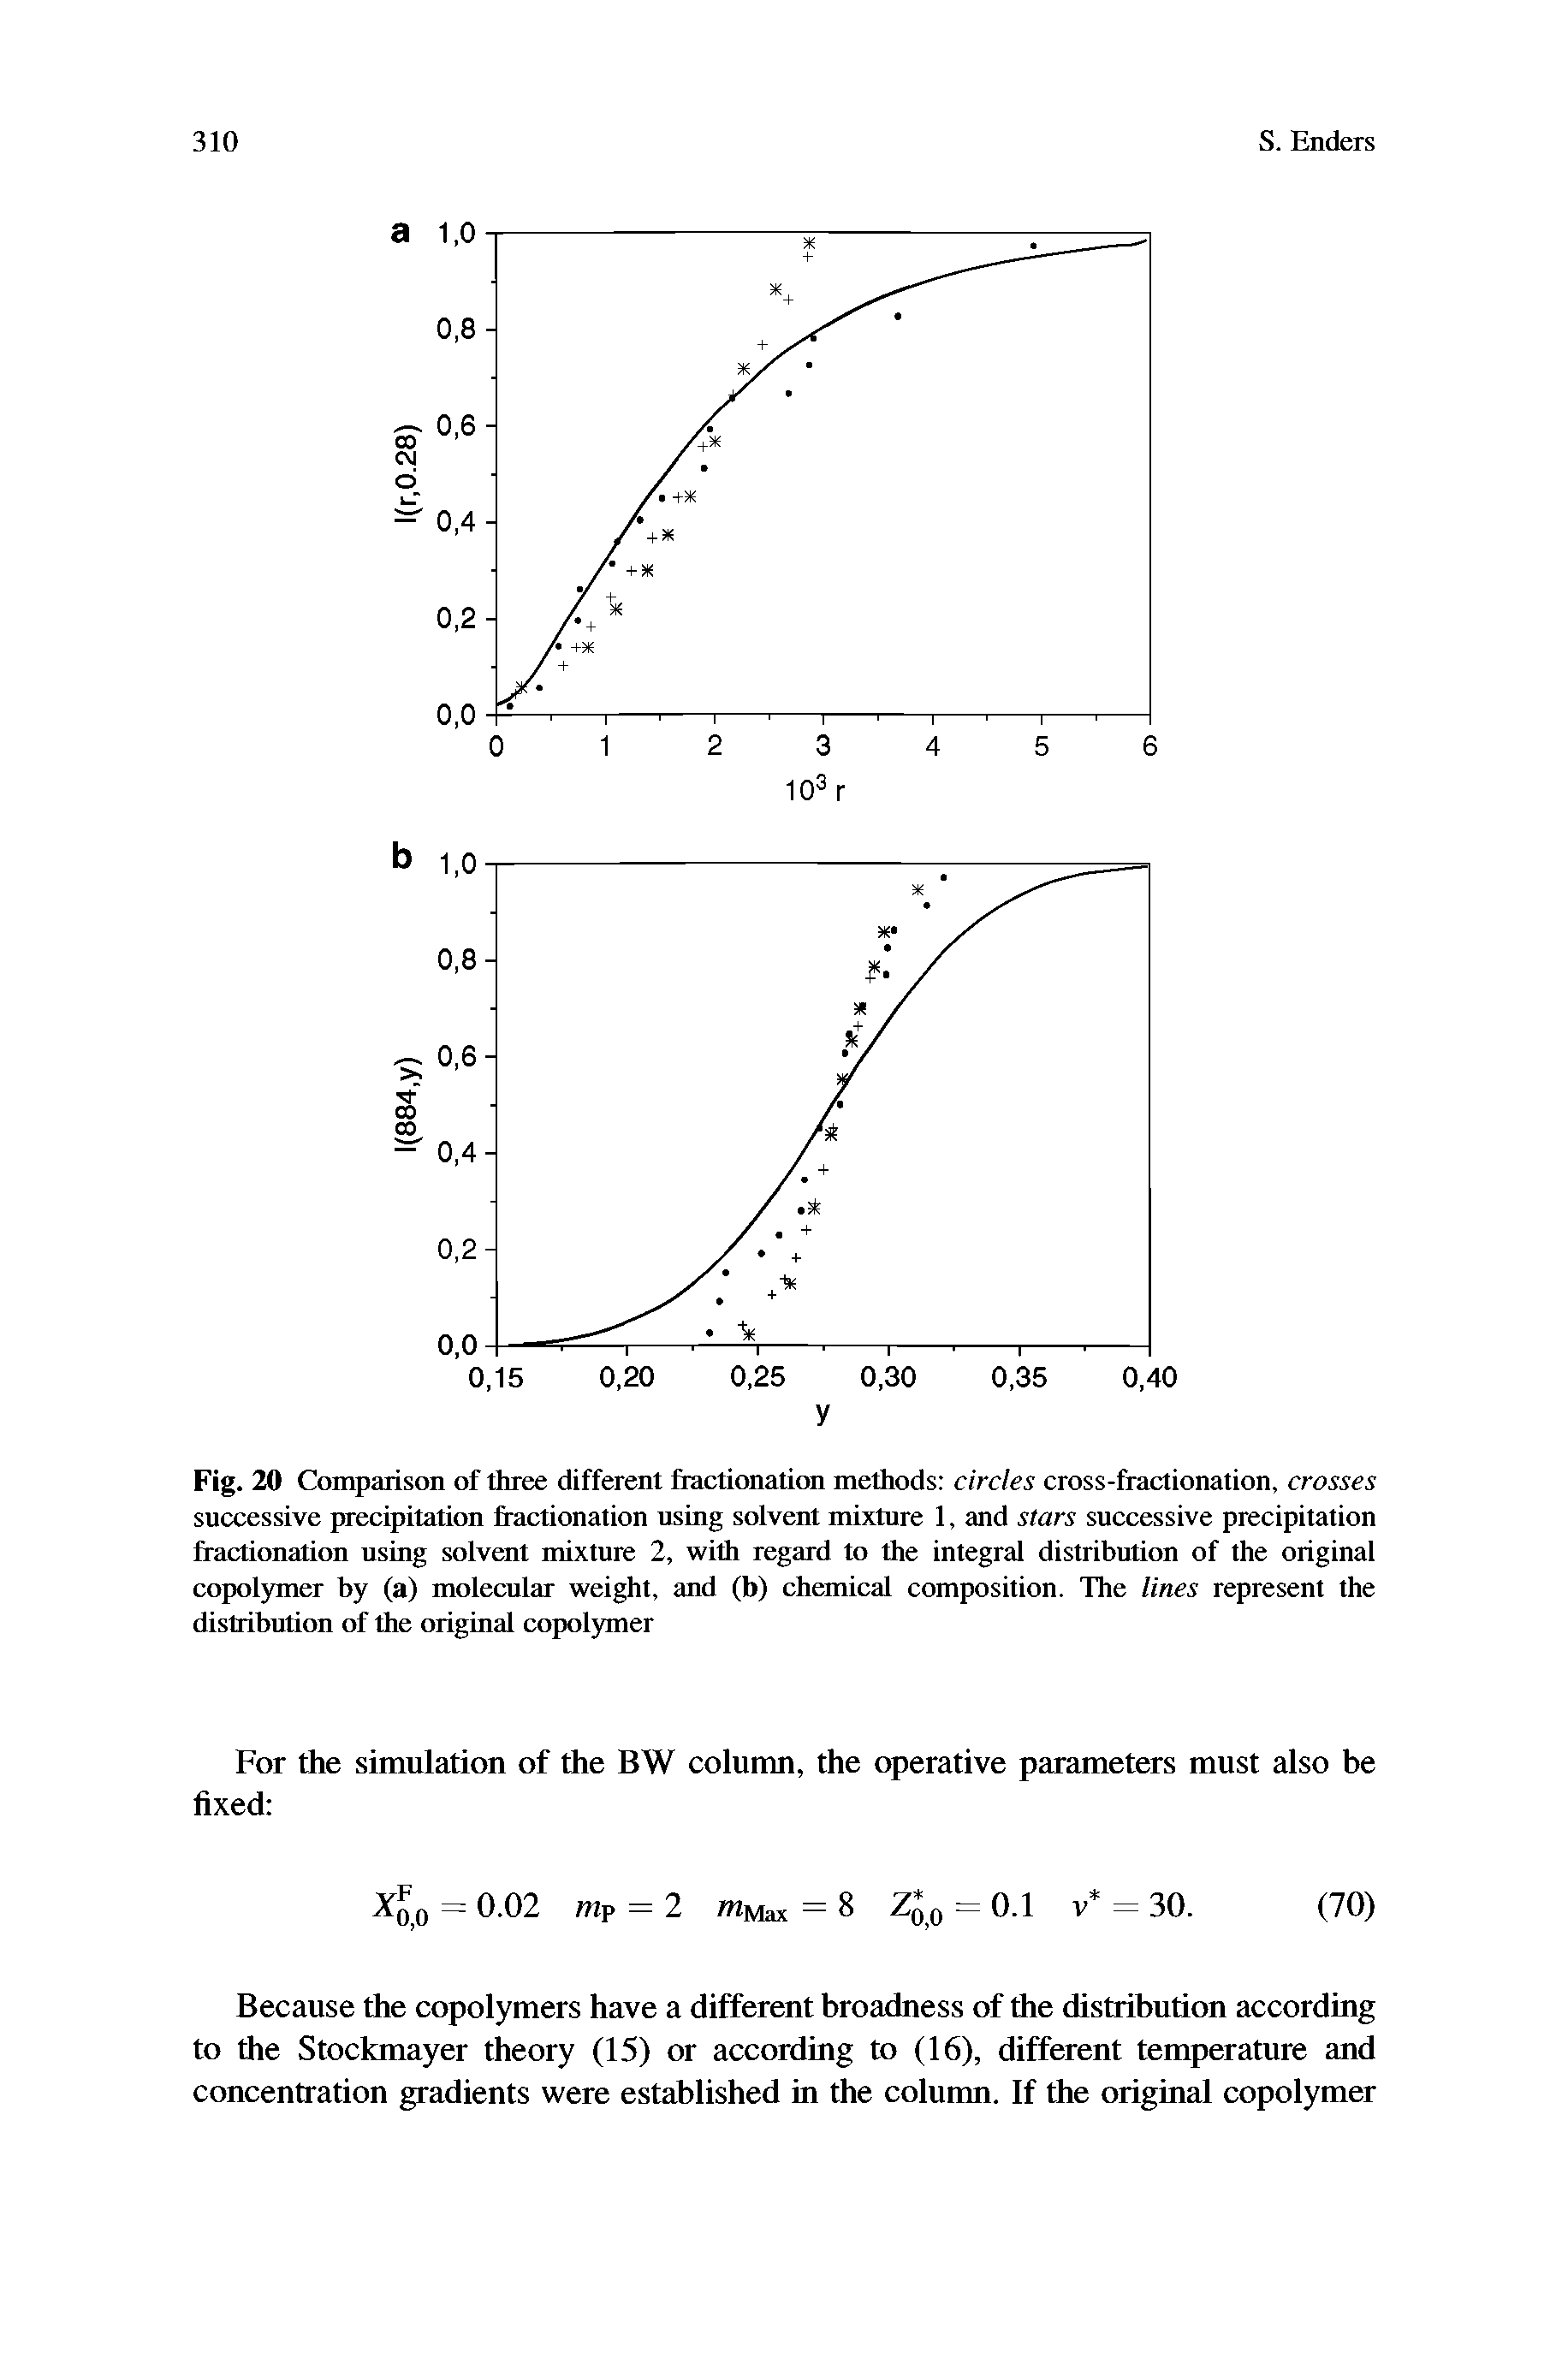 Fig. 20 Comparison of three different Iractionatimi methods circles cross-ftactionation, crosses snccessive precipitation fractionation using solvent mixture 1, and stars successive precipitation fractionation using solvent mixture 2, with regard to the integral distribution of the original copolymer by (a) molecular weight, and (b) chemical composition. The lines represent the distribution of the original copolymer...